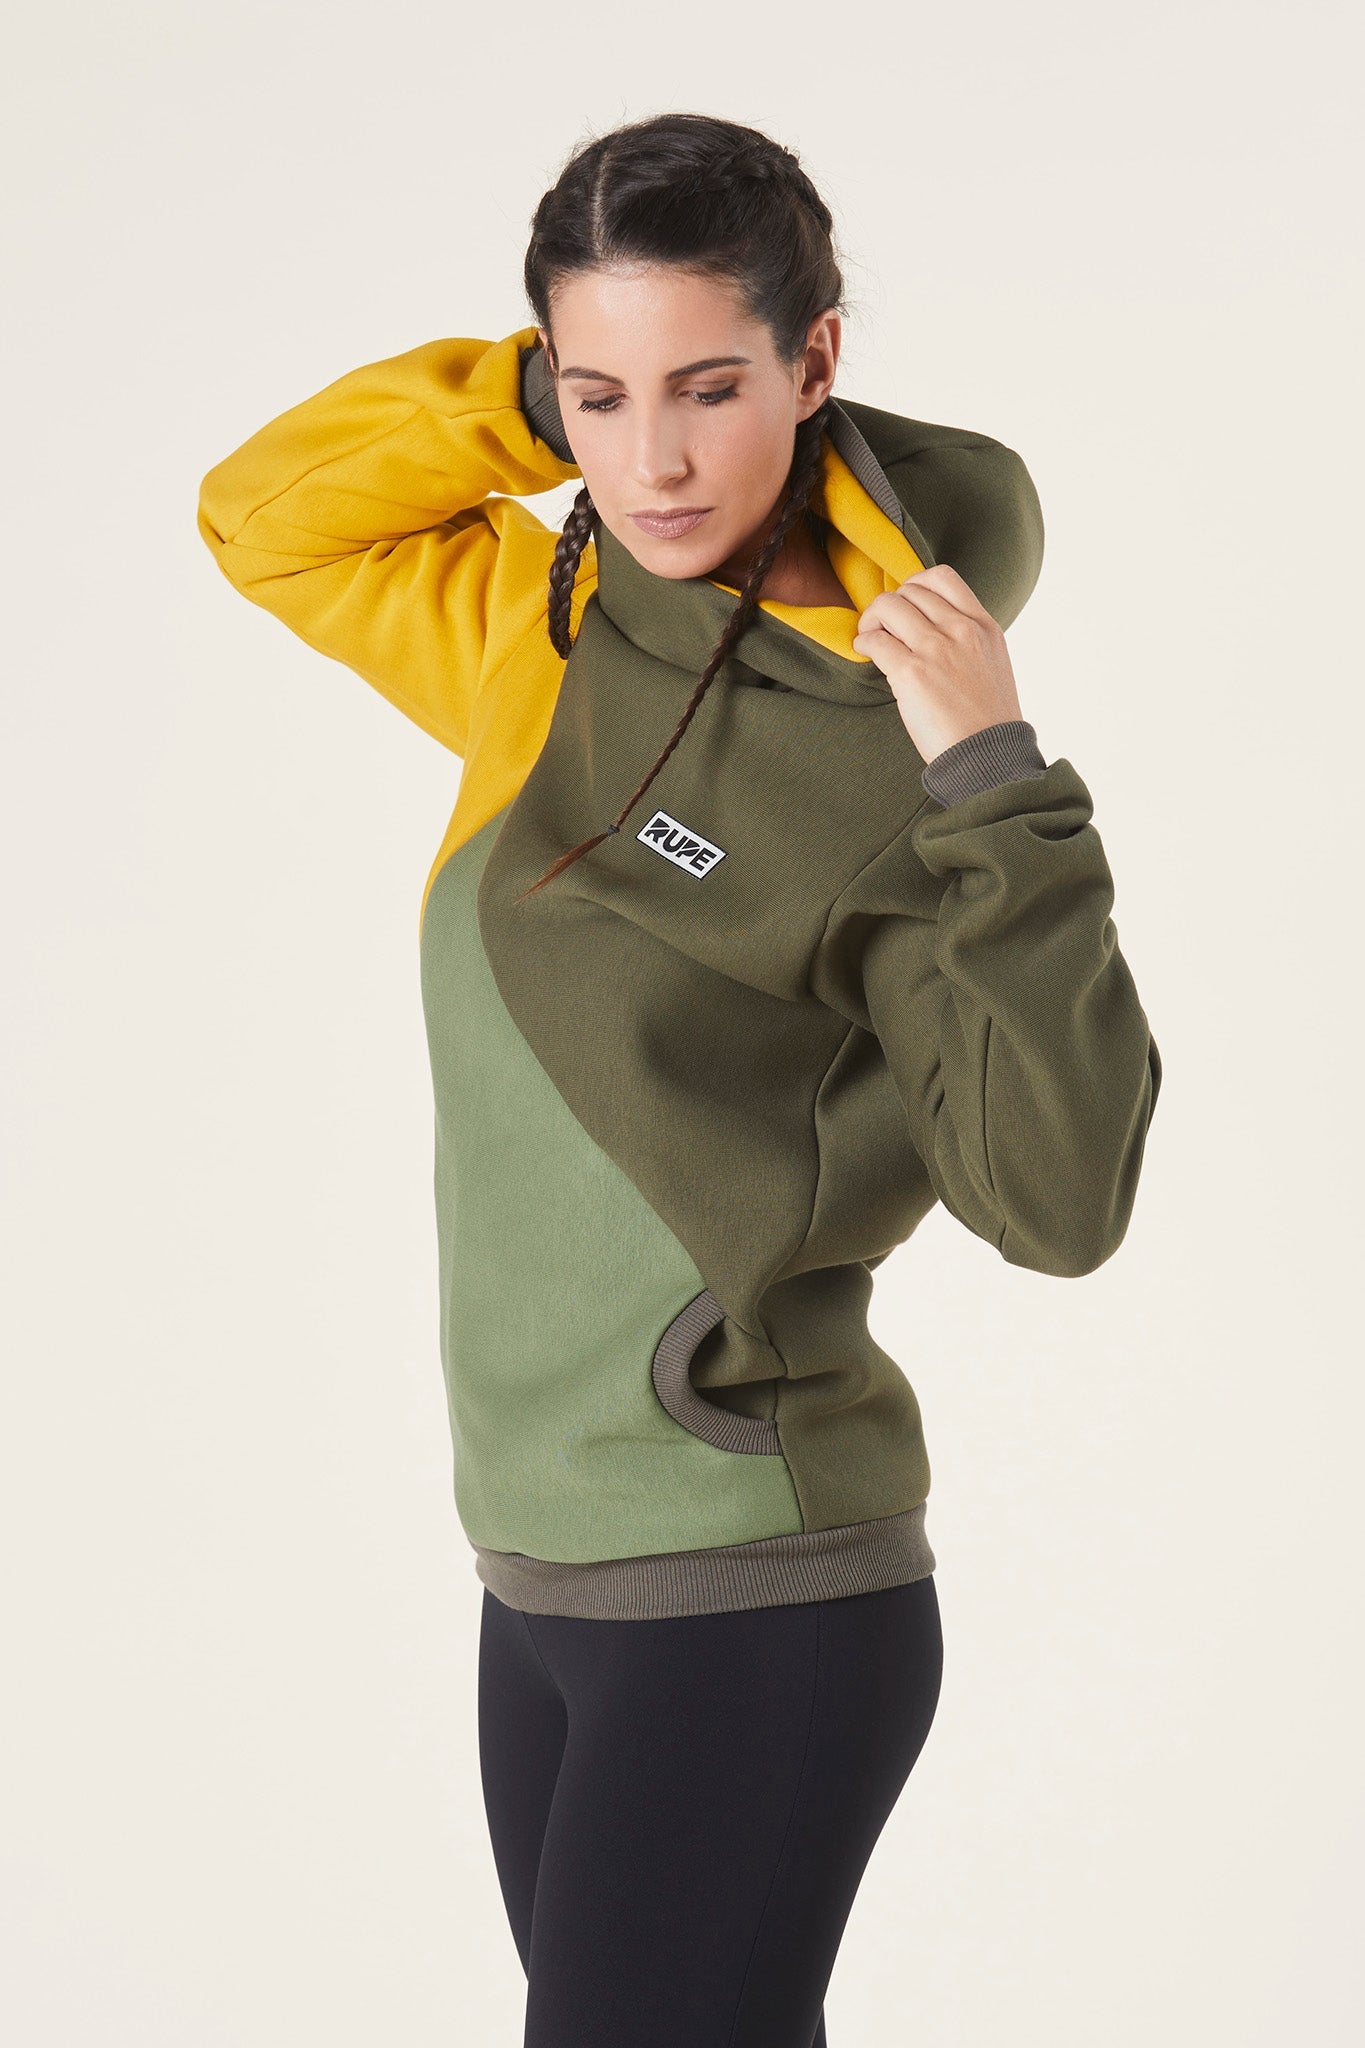 Sweatshirt in 3 colors with Hood - Woman - Jungle | CLIFF